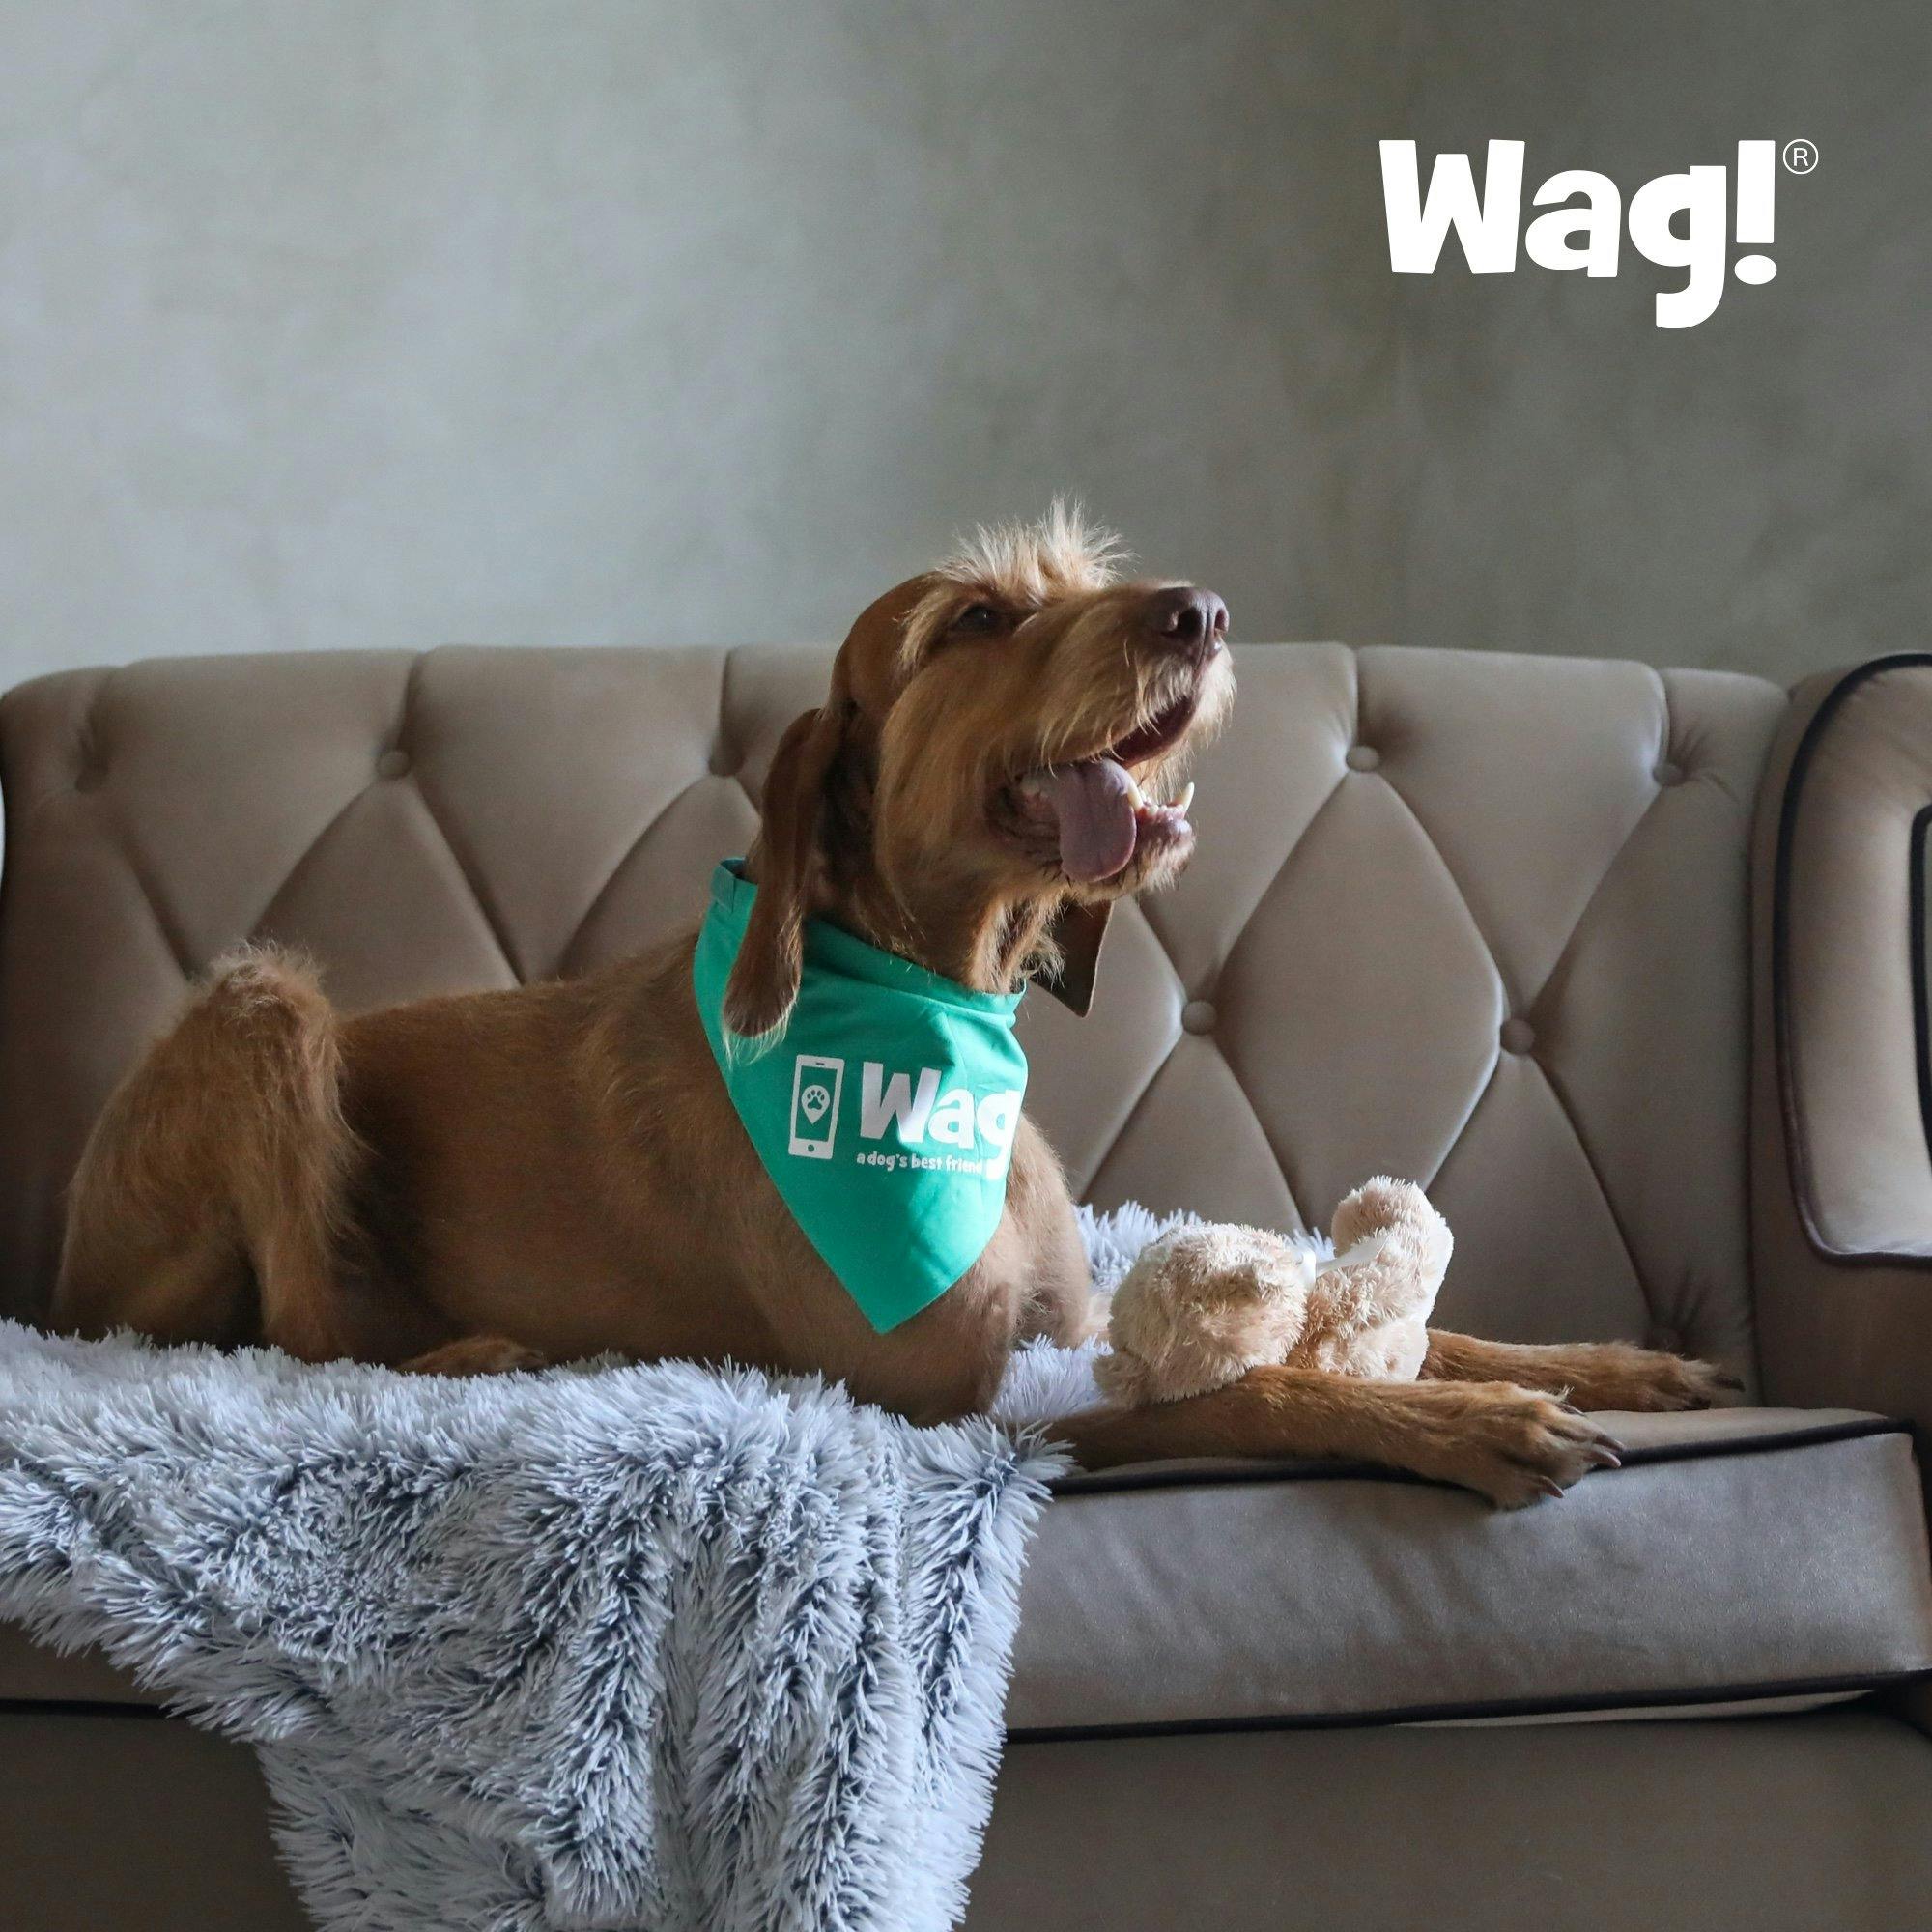 What's the Difference between Doggy Daycare and Wag! Drop-ins?